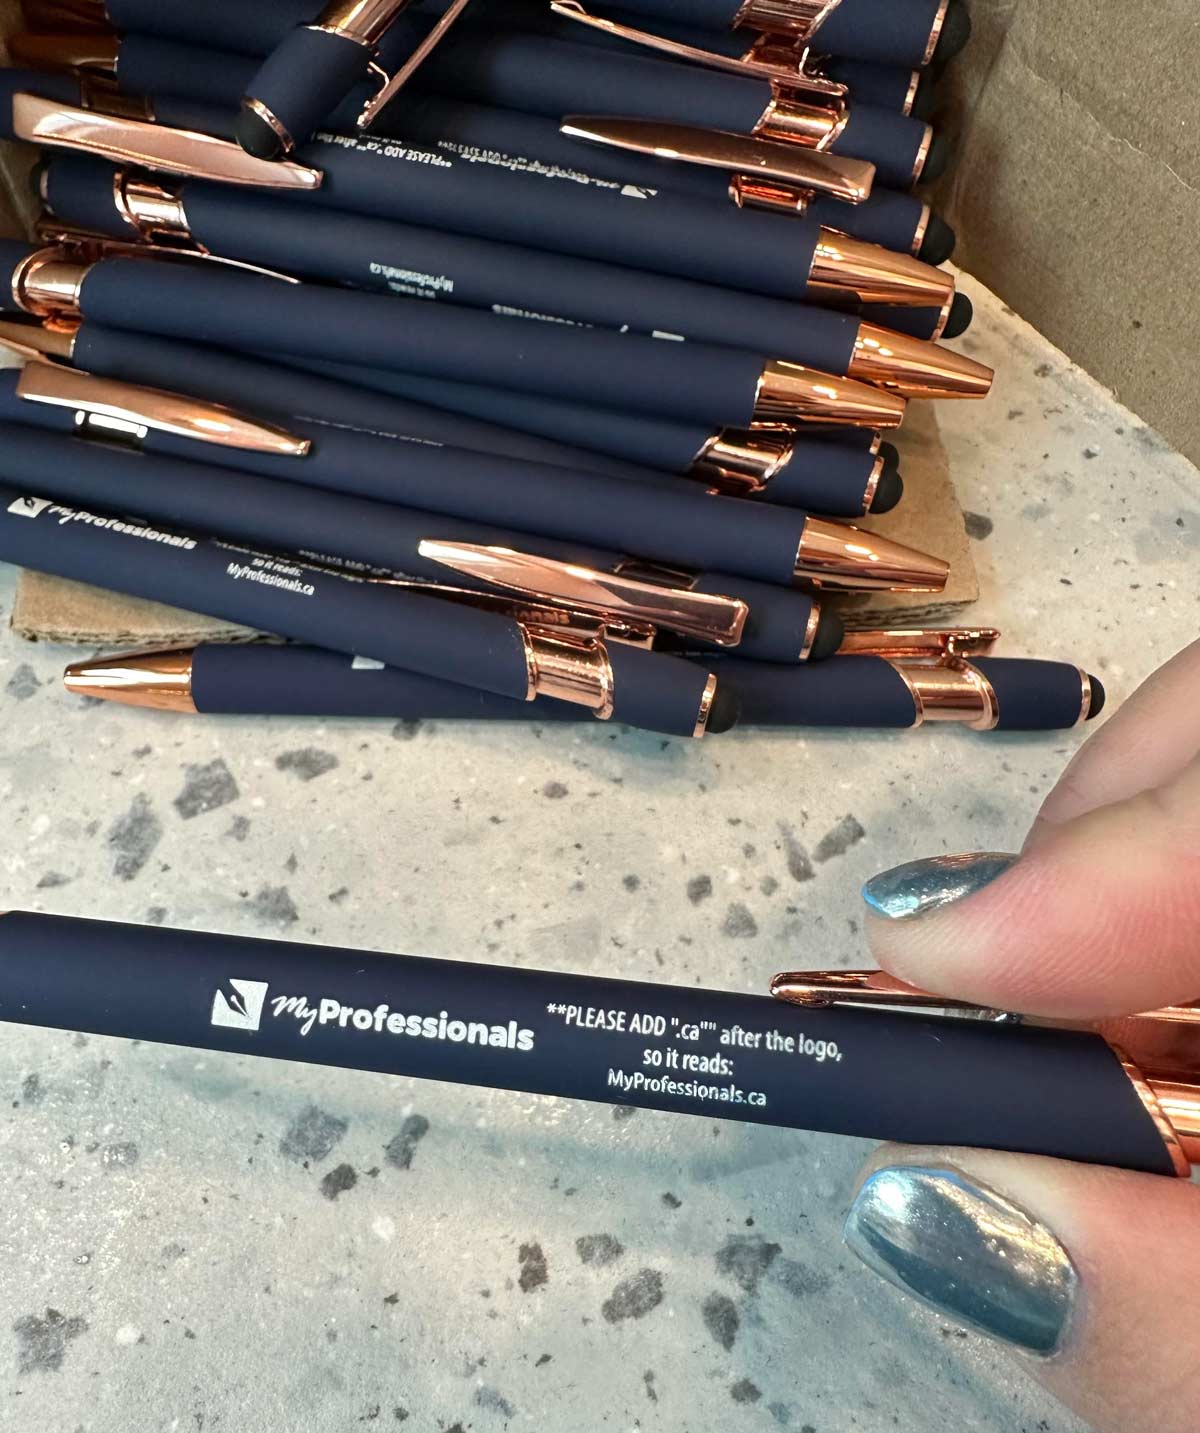 This company absolutely butchered our pen order...